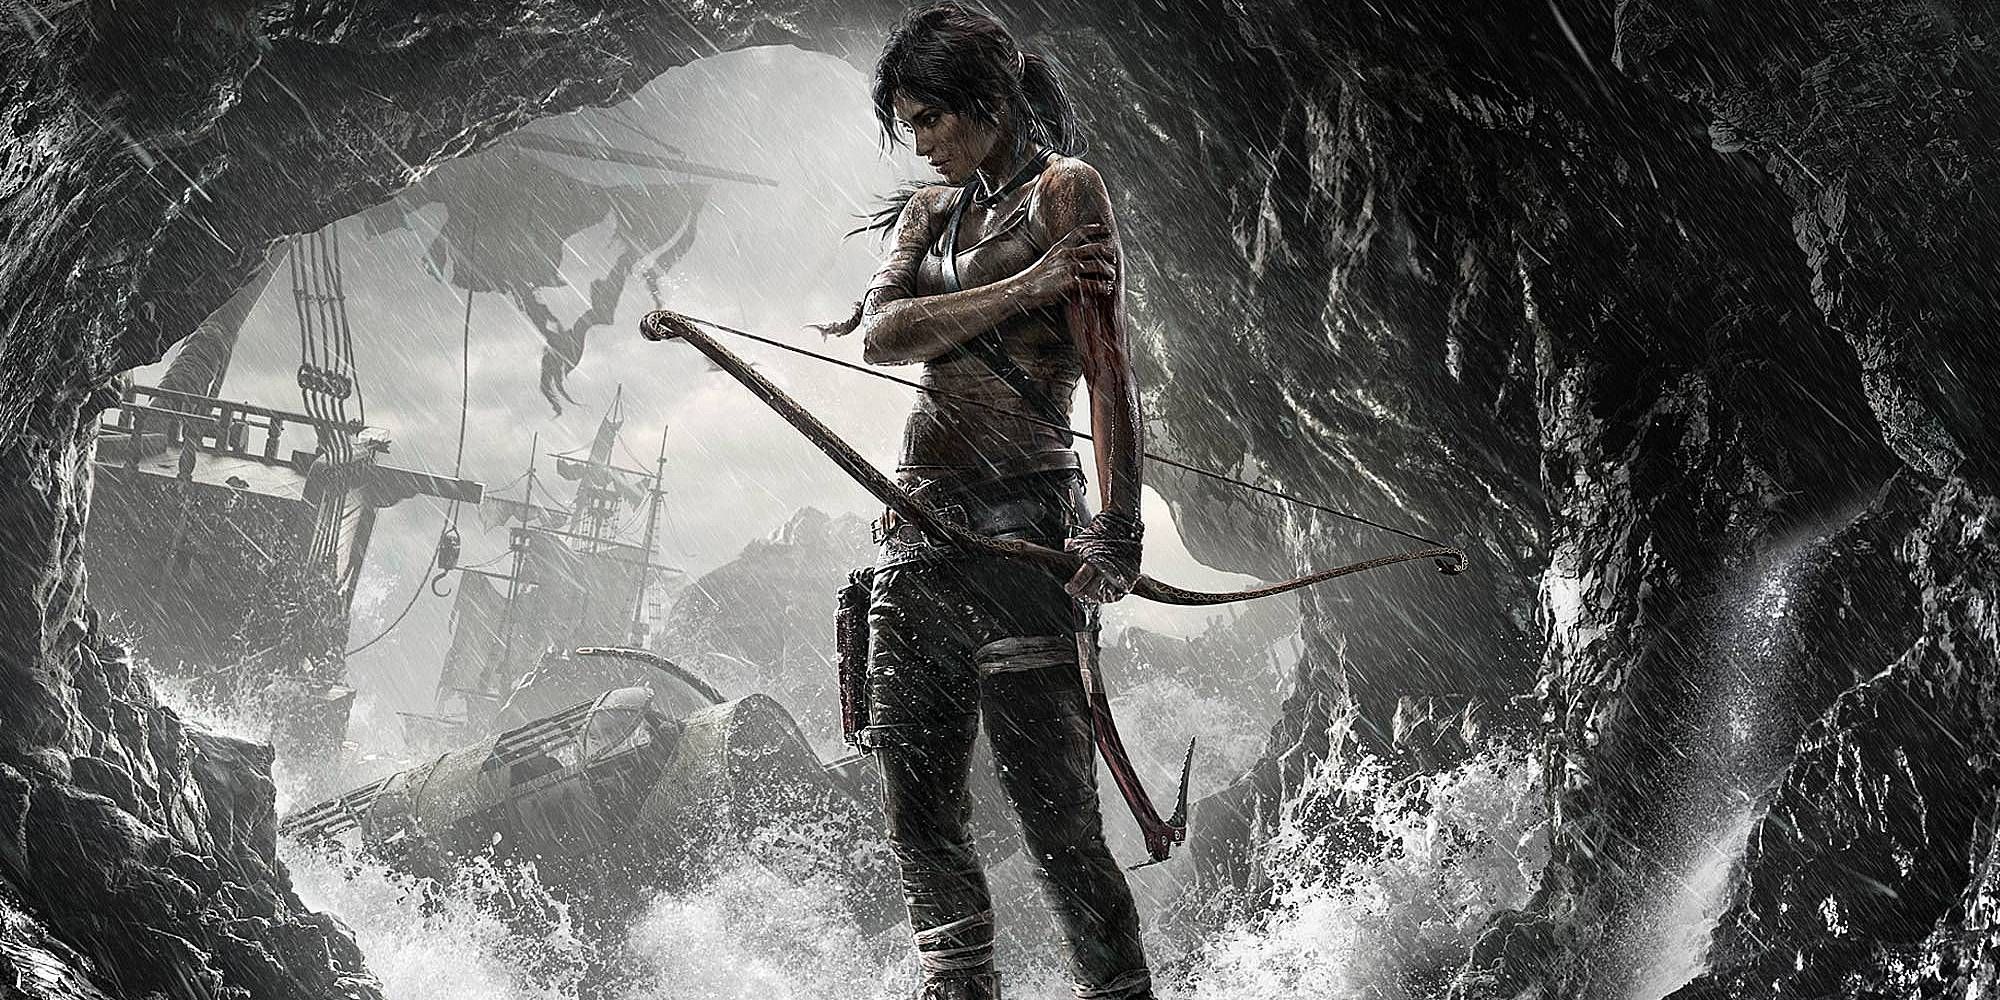 Lara Croft poses in a cave in the main image of Tomb Raider 2013